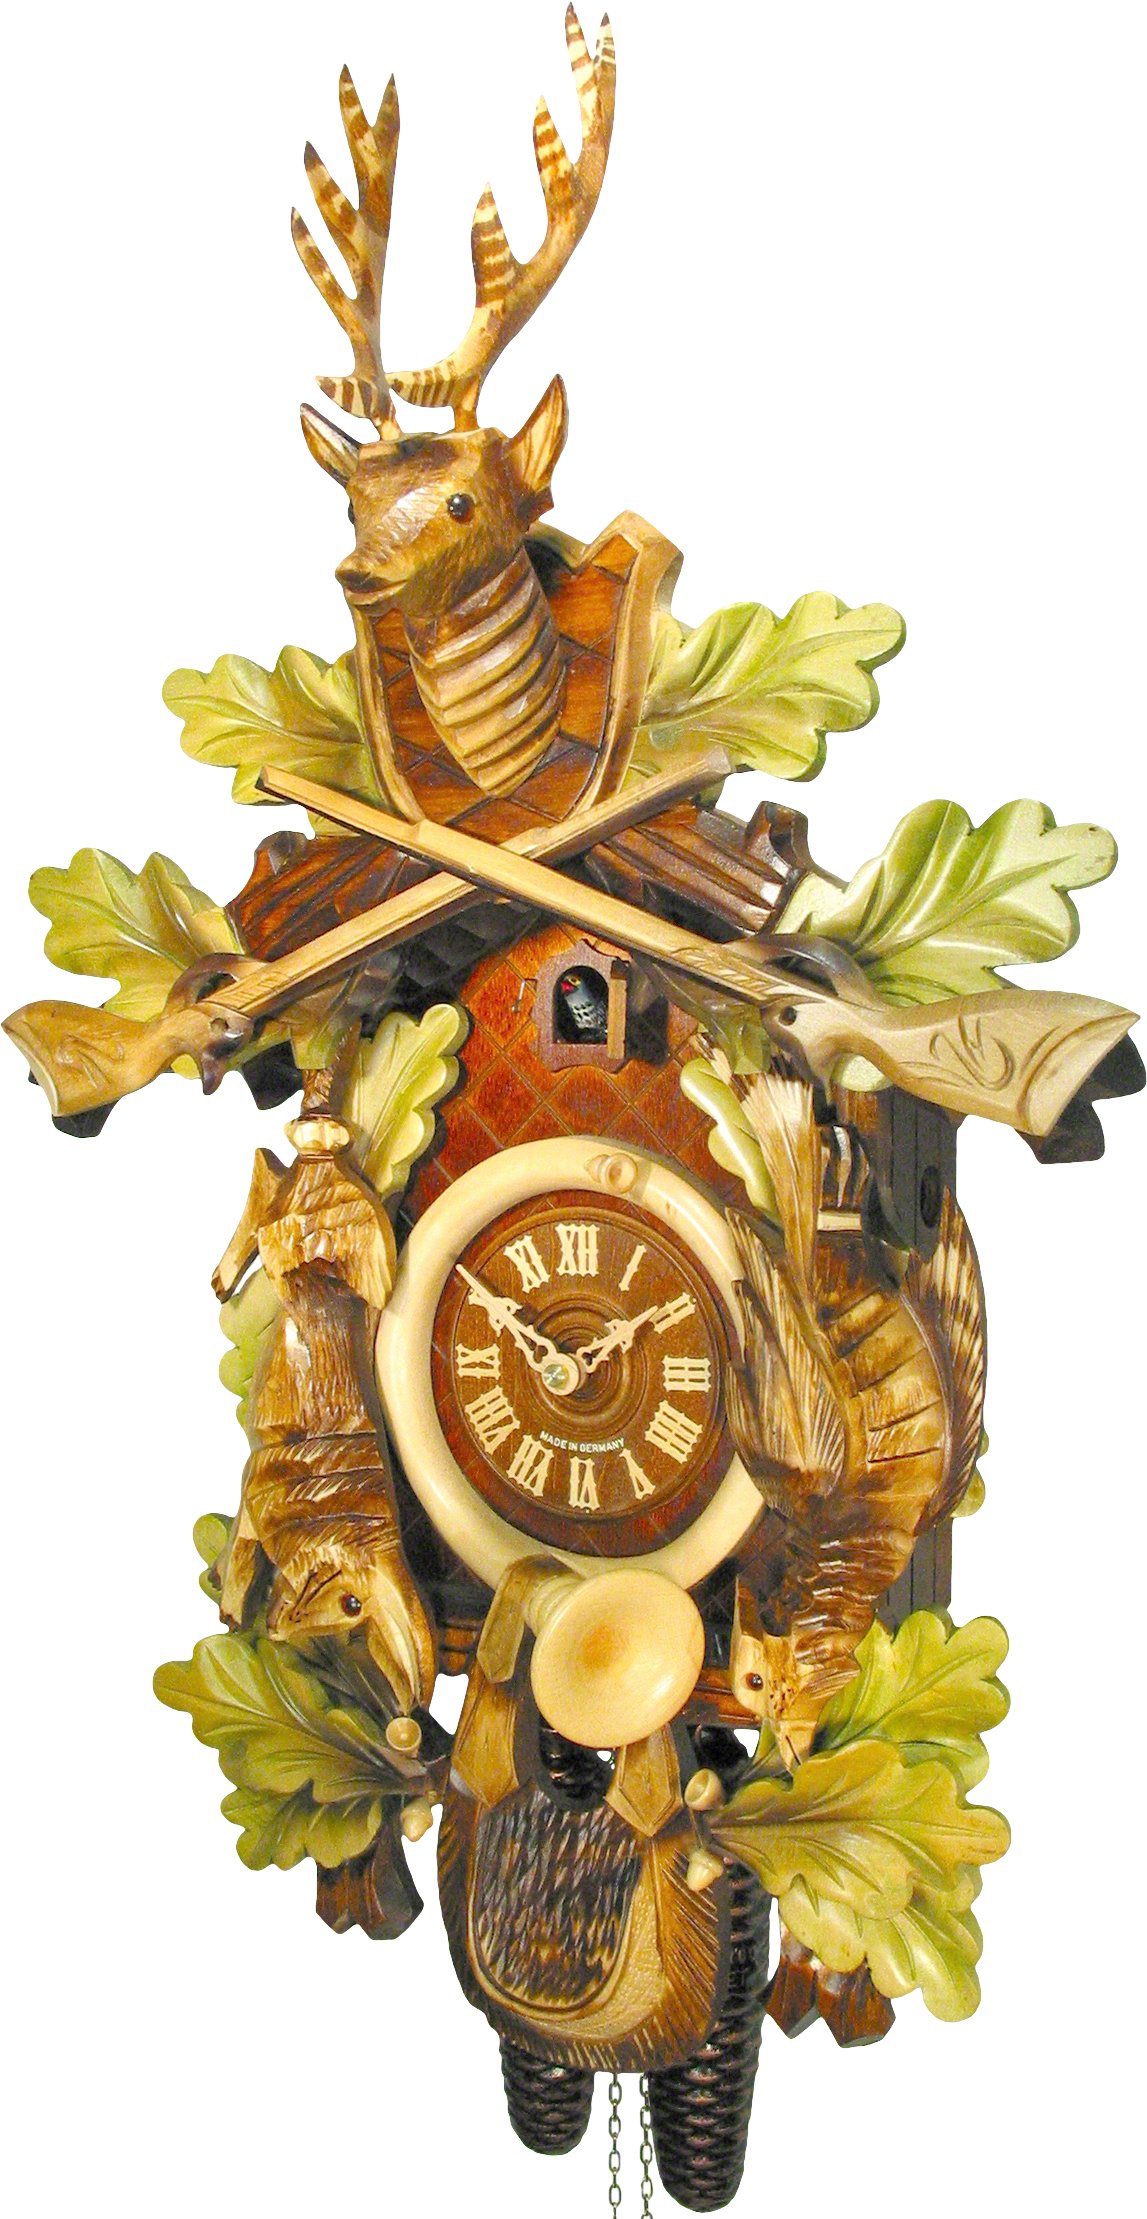 Cuckoo Clock Carved Style 8 Day Movement 60cm by August Schwer